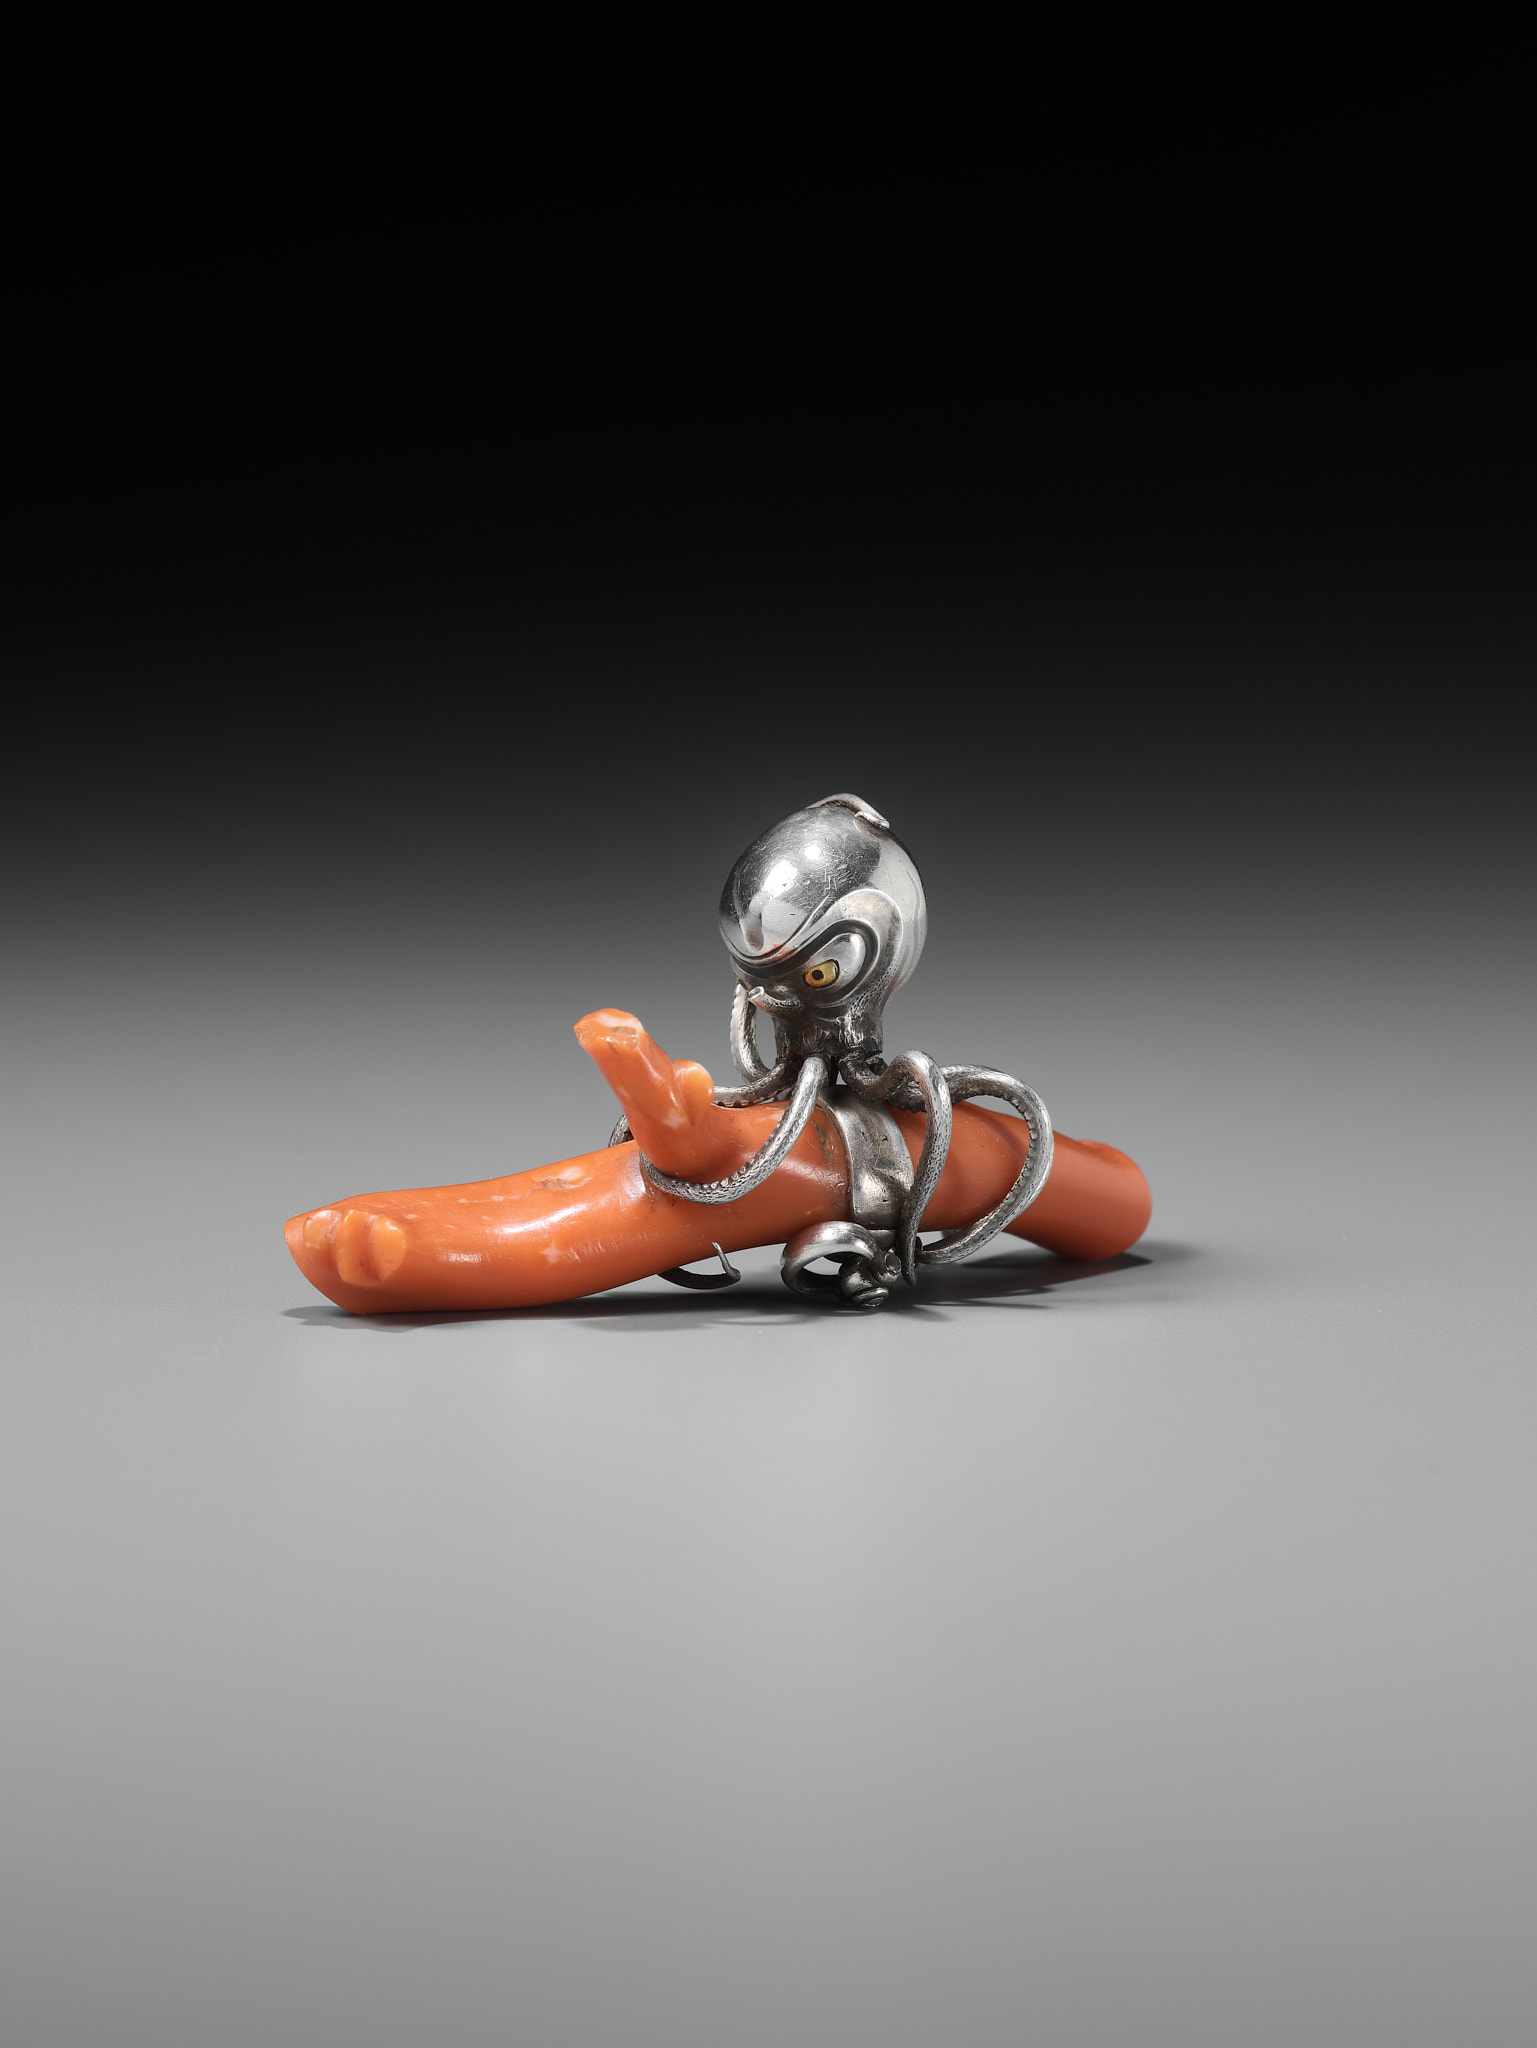 MINKOKU: A LARGE SILVER NETSUKE OF AN OCTOPUS GRASPING A PIECE OF CORAL - Image 6 of 14